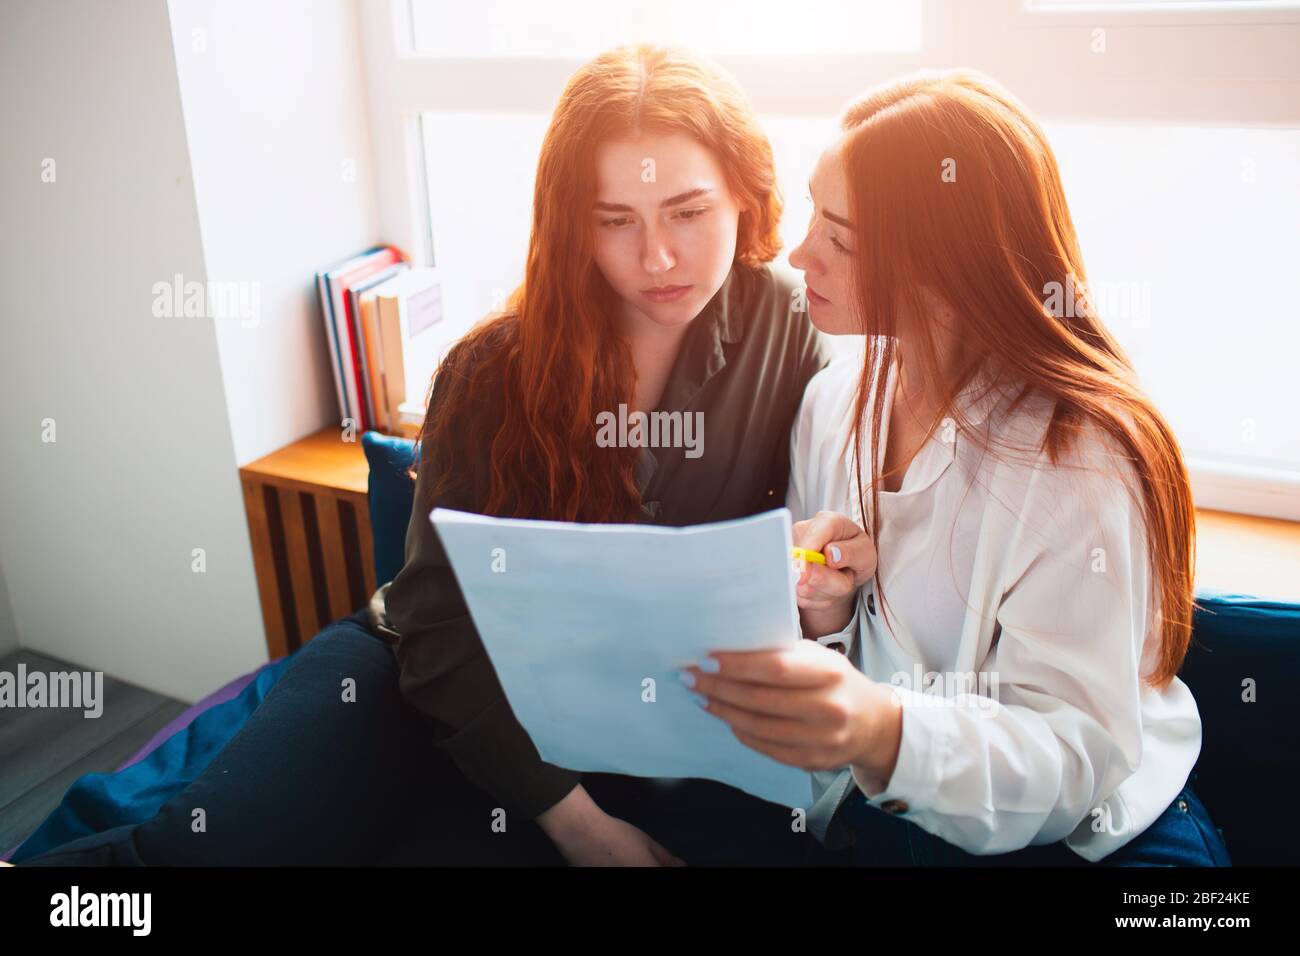 One student is holding a form or document or tests in her hands and the second is looking attentively. Two red-haired students study at home or in a Stock Photo